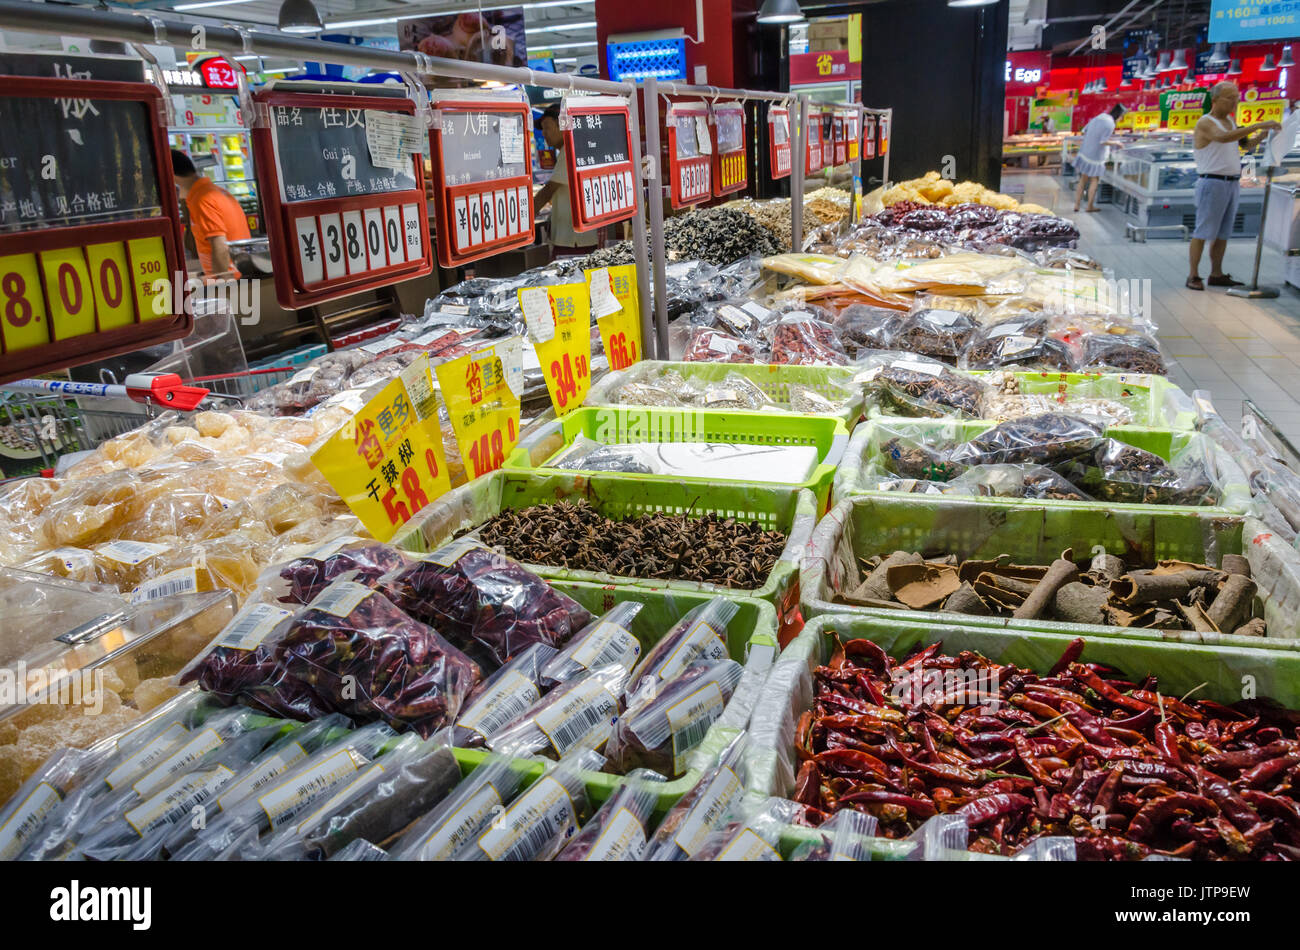 Spices for sale in a supermarket in Shanghai, China. Stock Photo